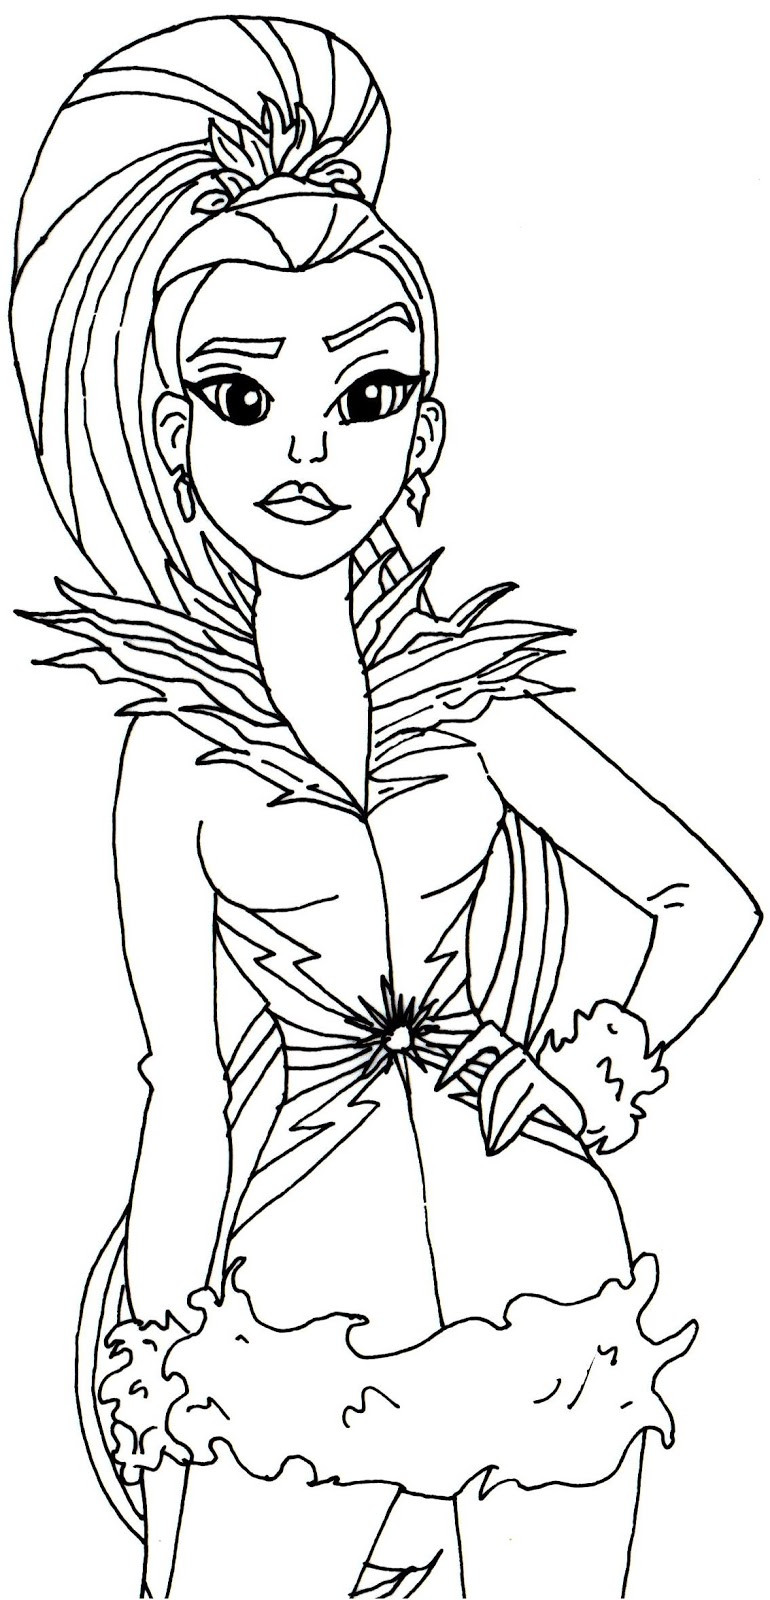 Dc Girls Coloring Pages
 Dc Superhero Girls Coloring Pages at GetColorings